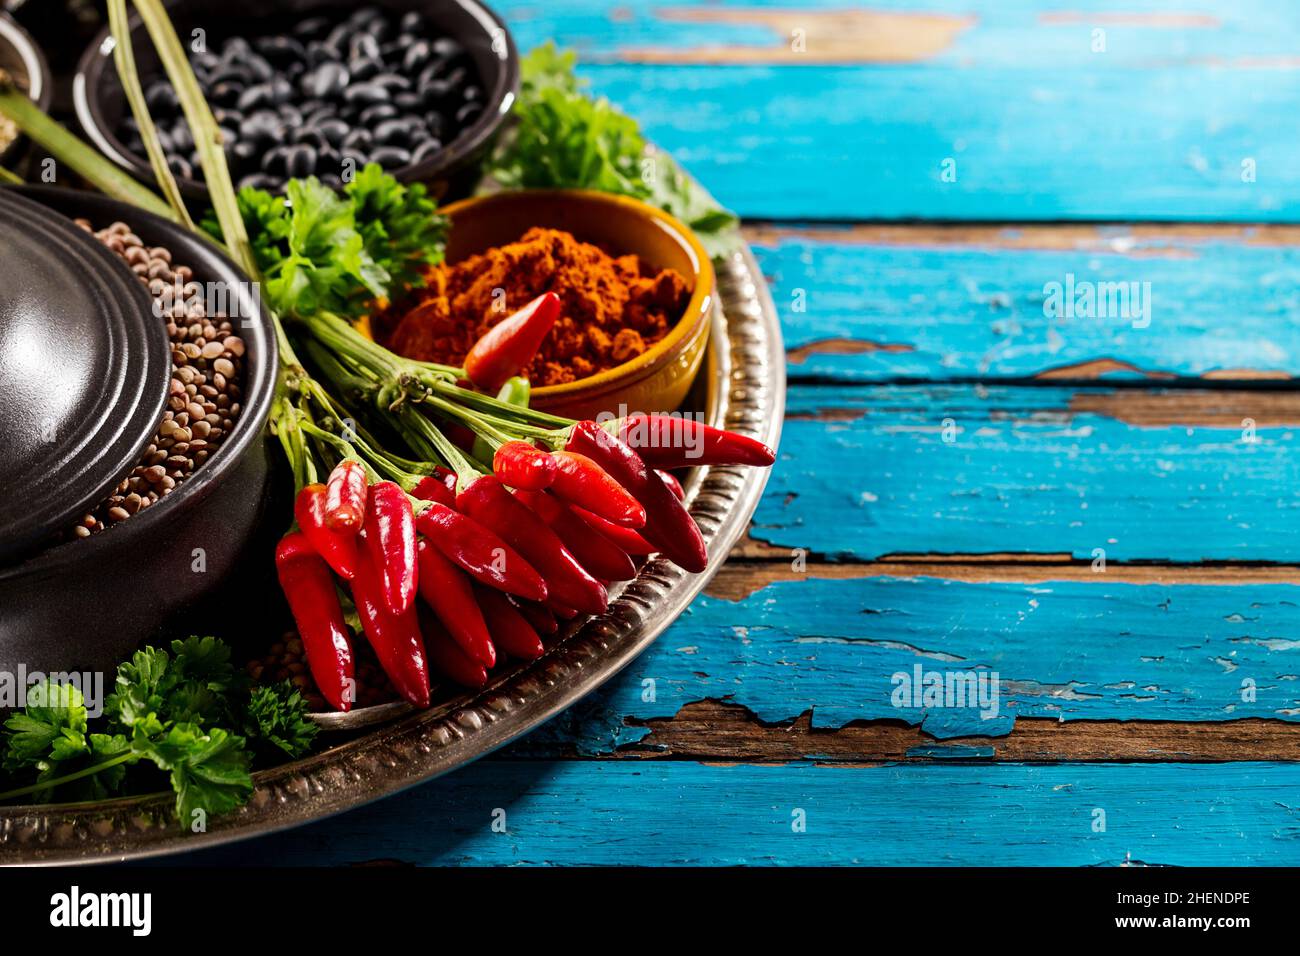 Beautiful Tasty Appetizing Ingredients Spices Grocery Red Chilli Pepper Black Bowls for Cooking Healthy Kitchen. Stock Photo